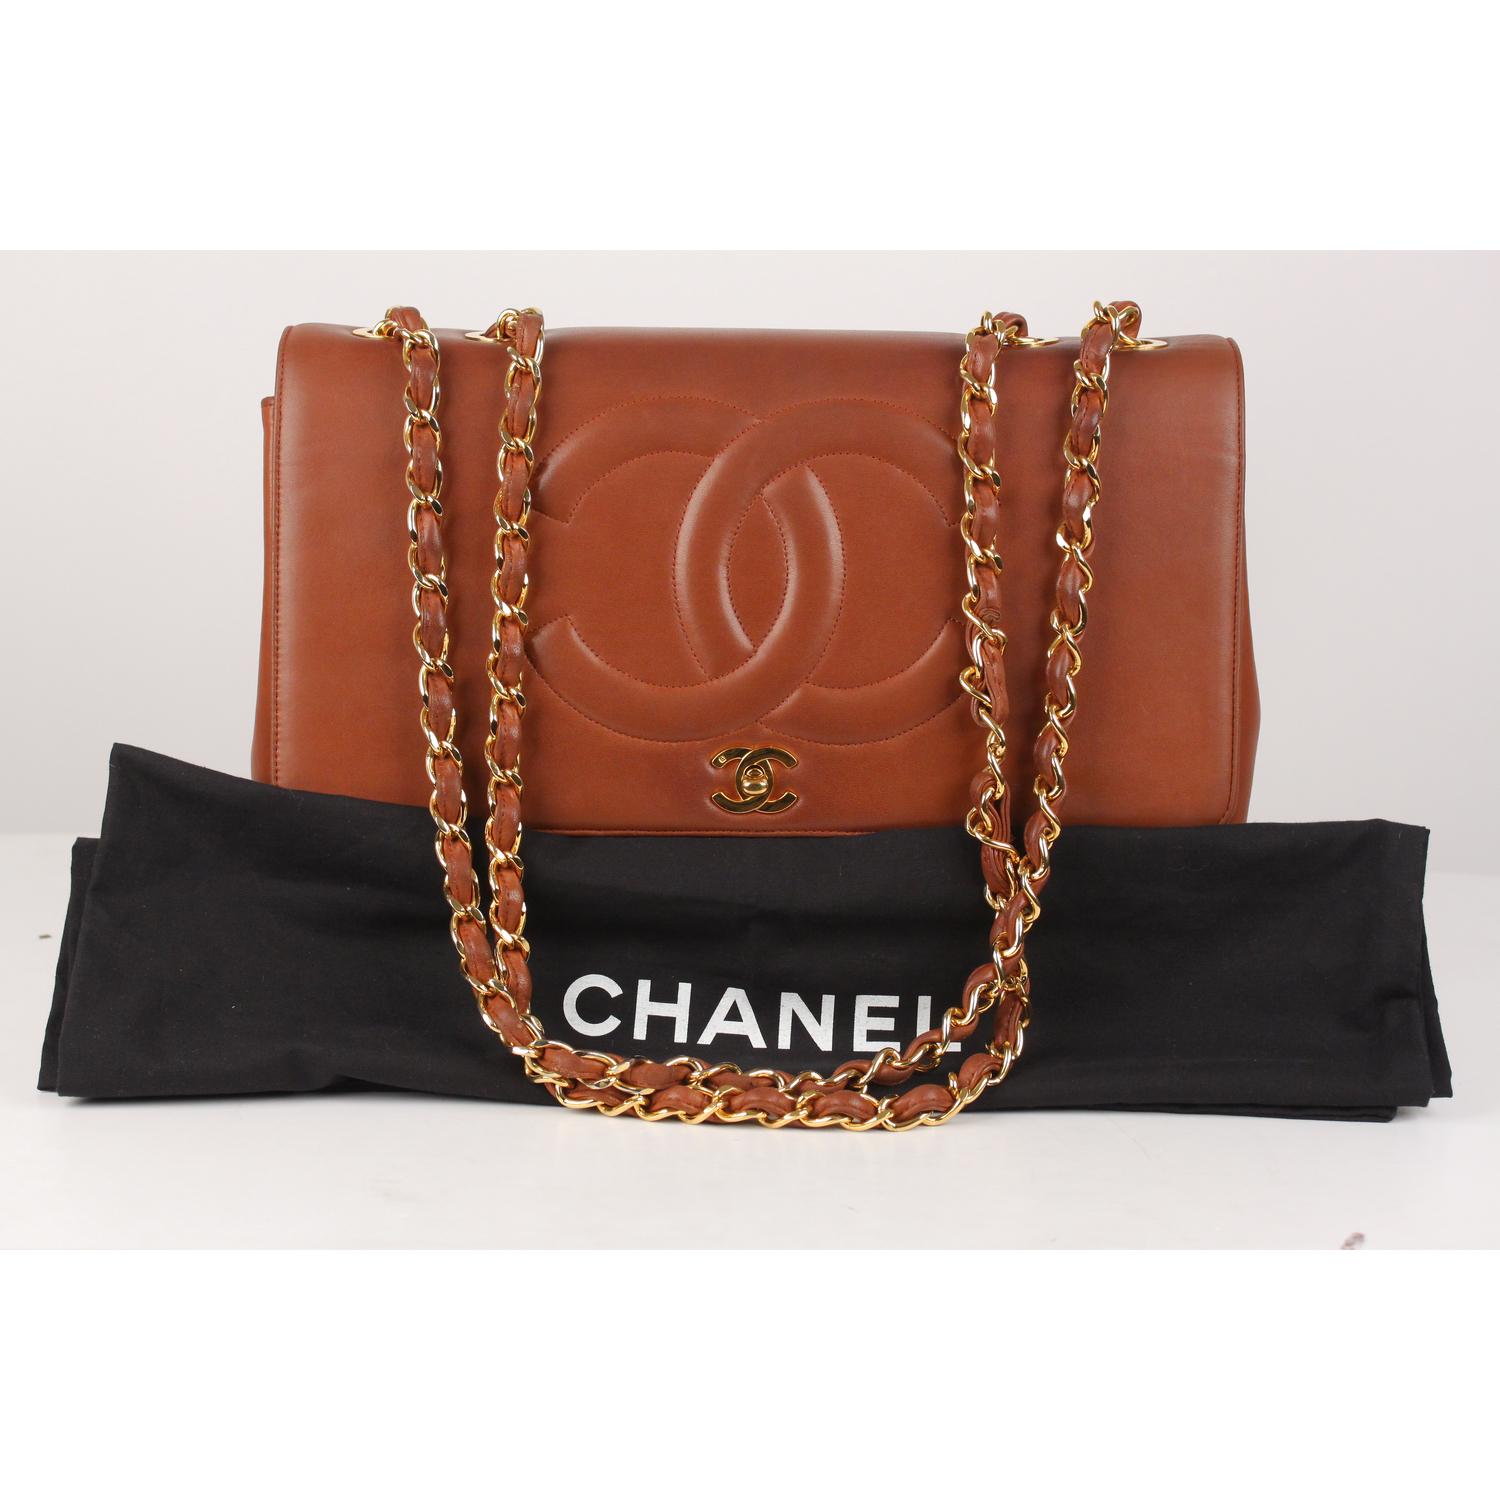 We offer Certificate of Authenticity provided by Entrupy for this item at no further cost.

CHANEL Lambskin Jumbo CC Logo Shoulder Bag in brown color. Single flap design, crafted of brown diamond quilted soft lambskin leather. The bag features gold